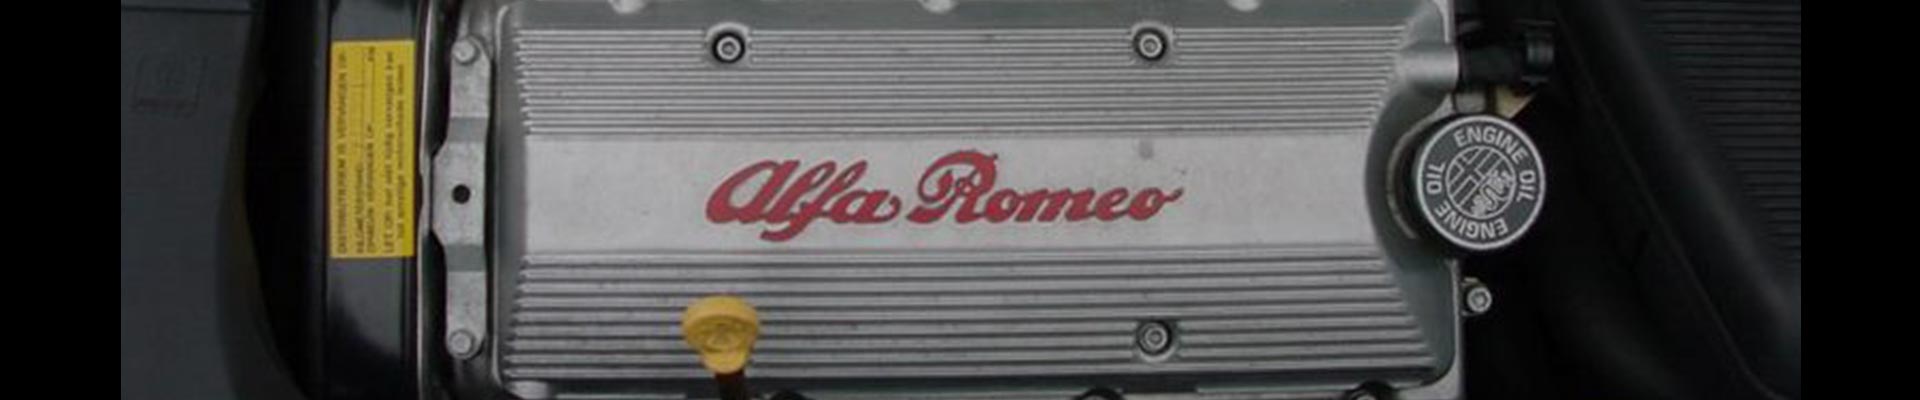 Shop Replacement 1993 Alfa Romeo Spider Parts with Discounted Price on the Net